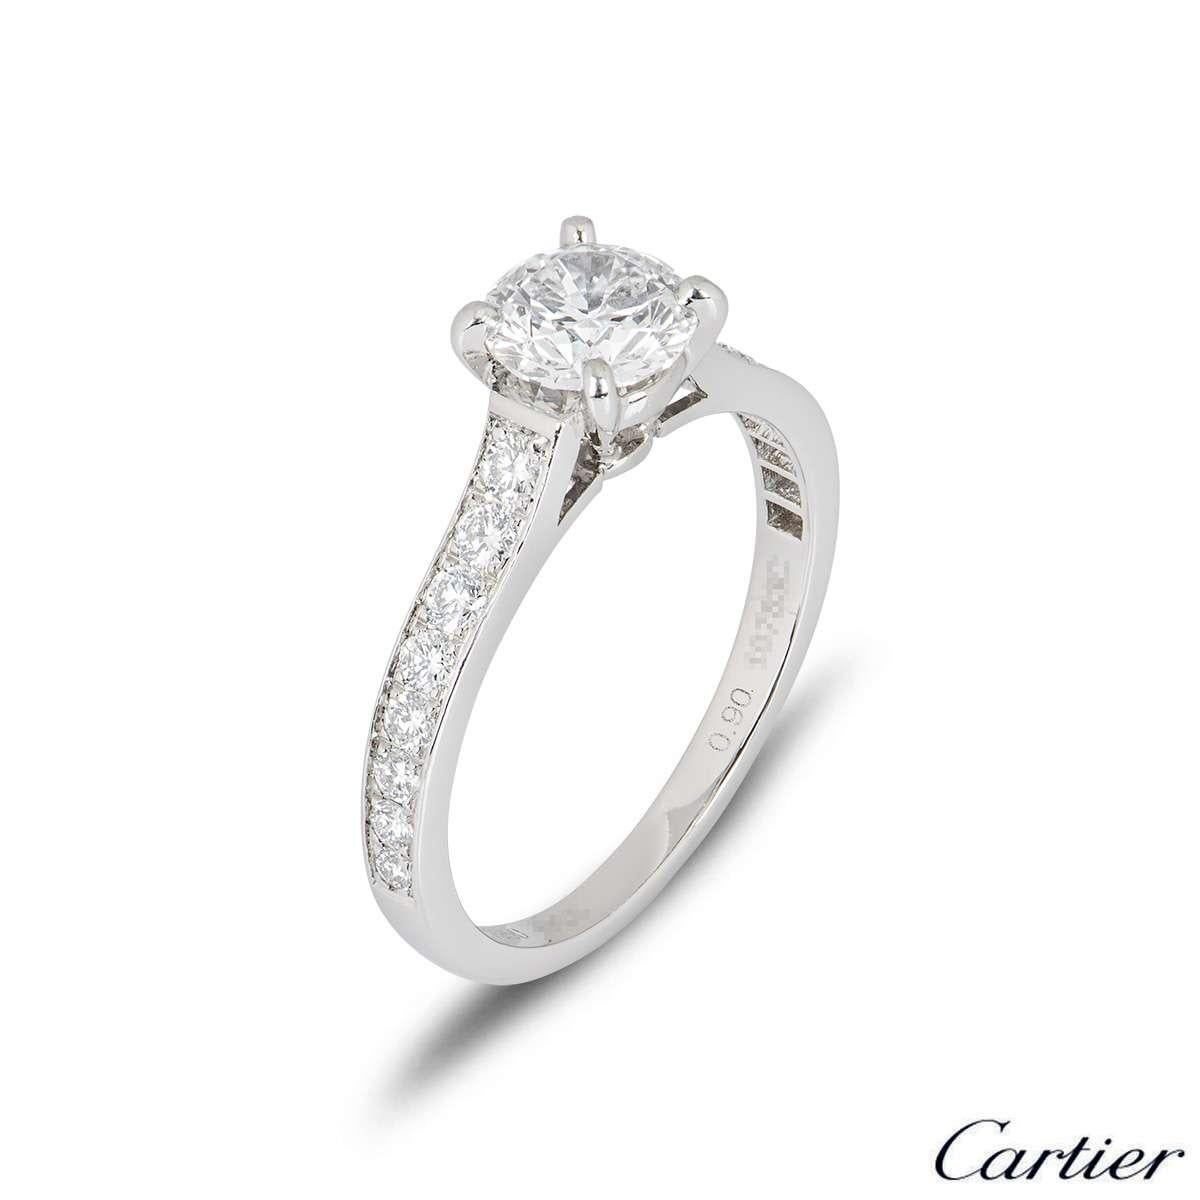 A stunning platinum Cartier diamond engagement ring from the 1895 solitaire collection. The ring comprises of a round brilliant cut diamond in a four claw setting with a weight of 0.90ct, E colour and VS2 clarity. There are 16 round brilliant cut